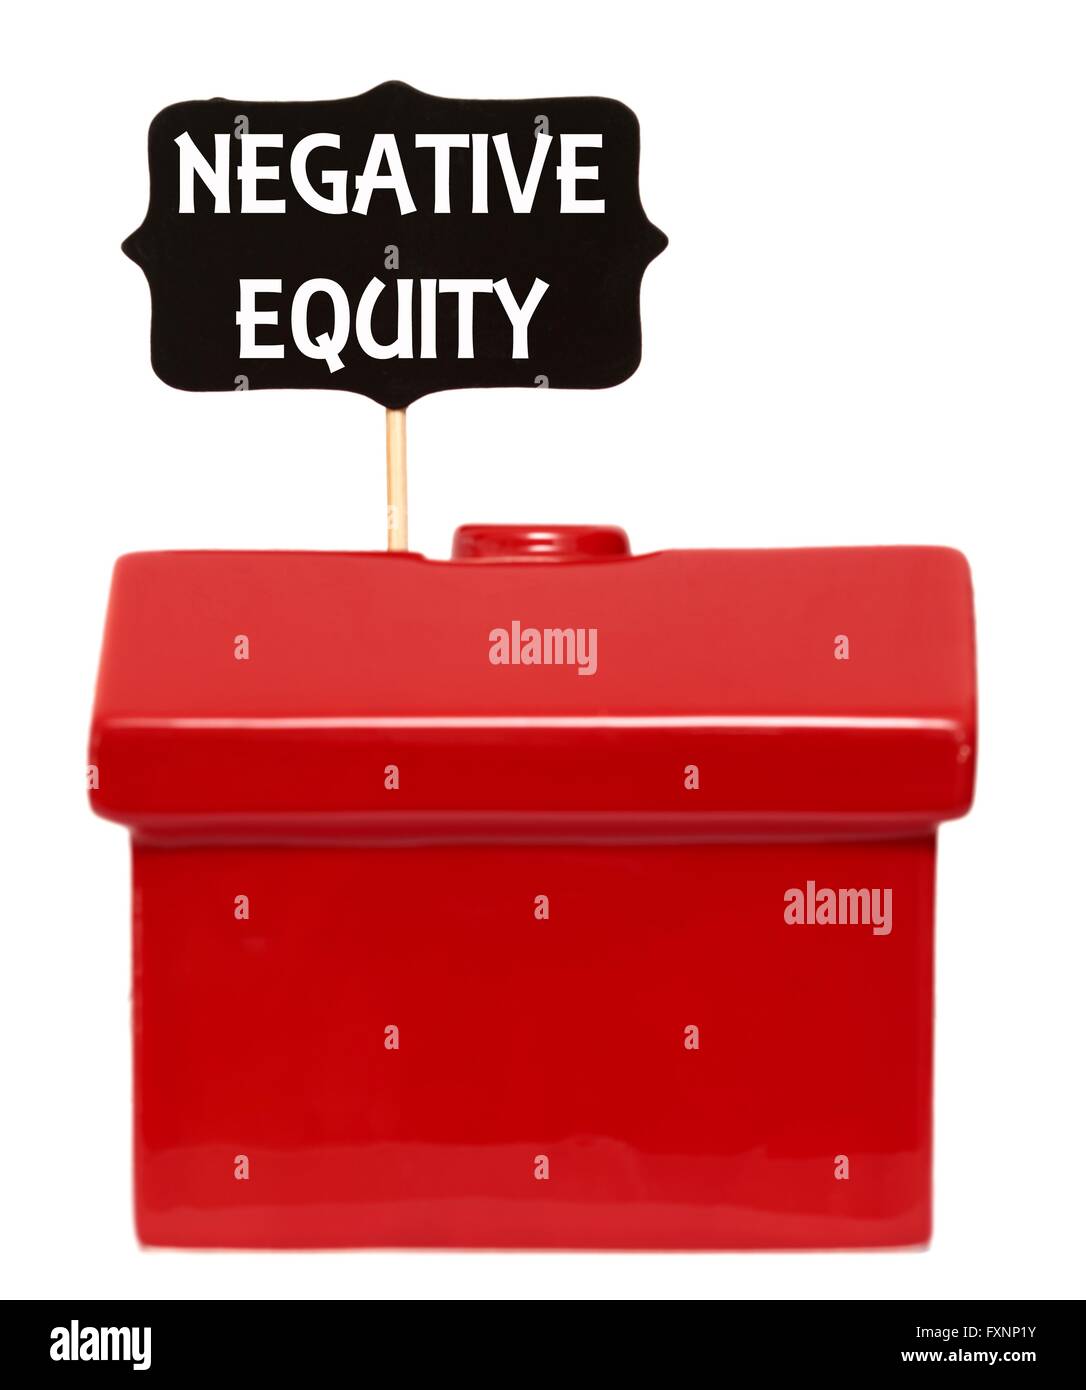 Red house with negative equity sign Stock Photo